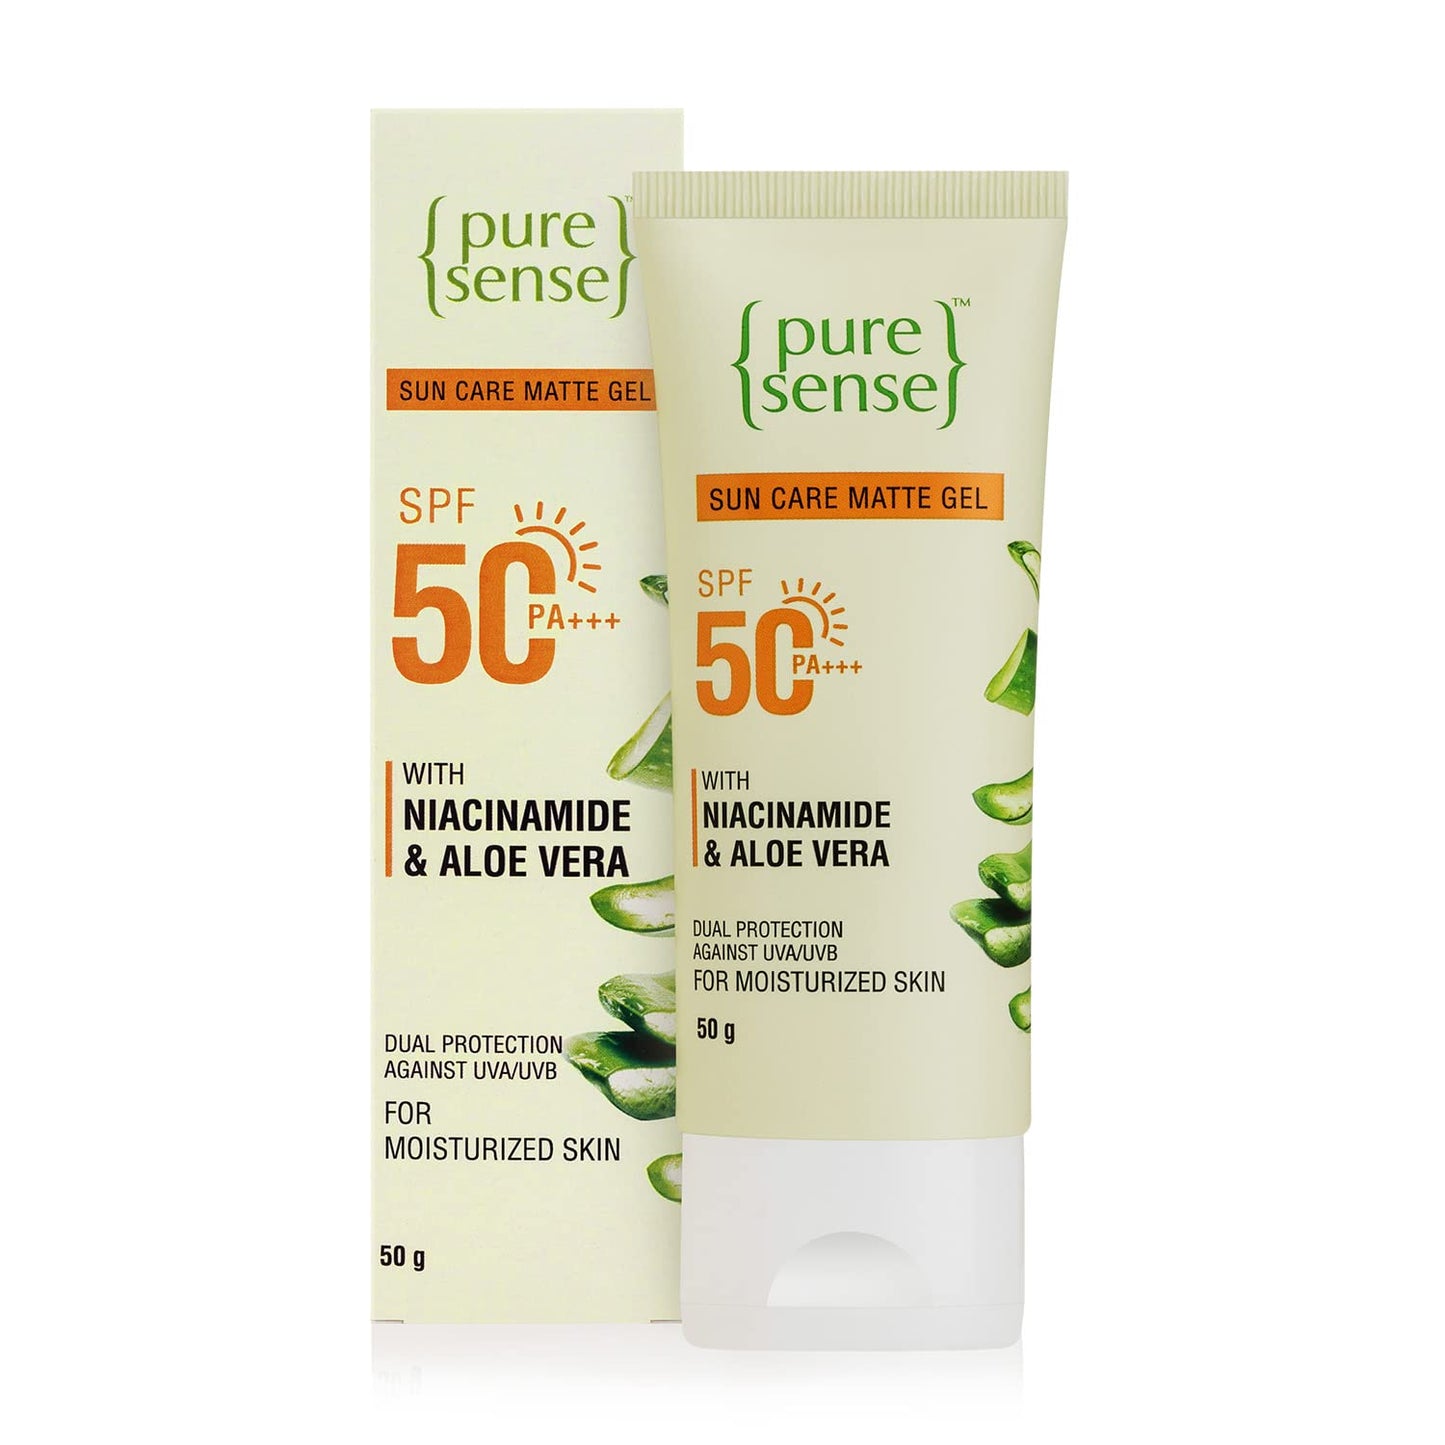 PureSense Sunscreen SPF 50 PA +++ Sun Care Matte Gel with Aloe Vera & Niacinamide | Dual Protection UV B - From the Makers of Parachute Advansed | 50g